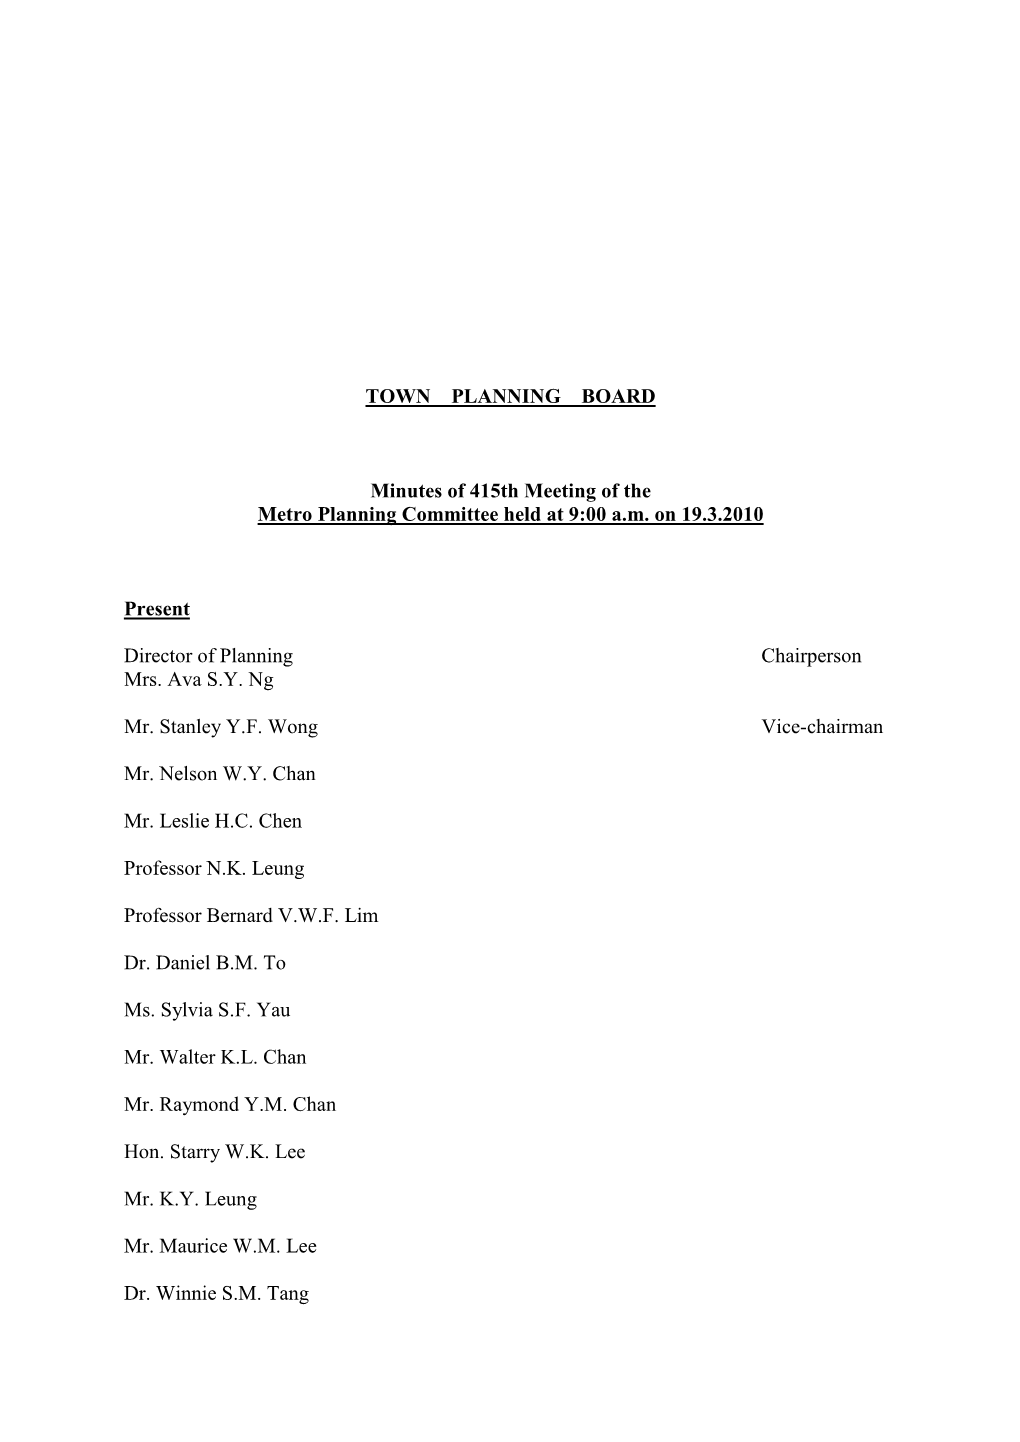 TOWN PLANNING BOARD Minutes of 415Th Meeting of the Metro